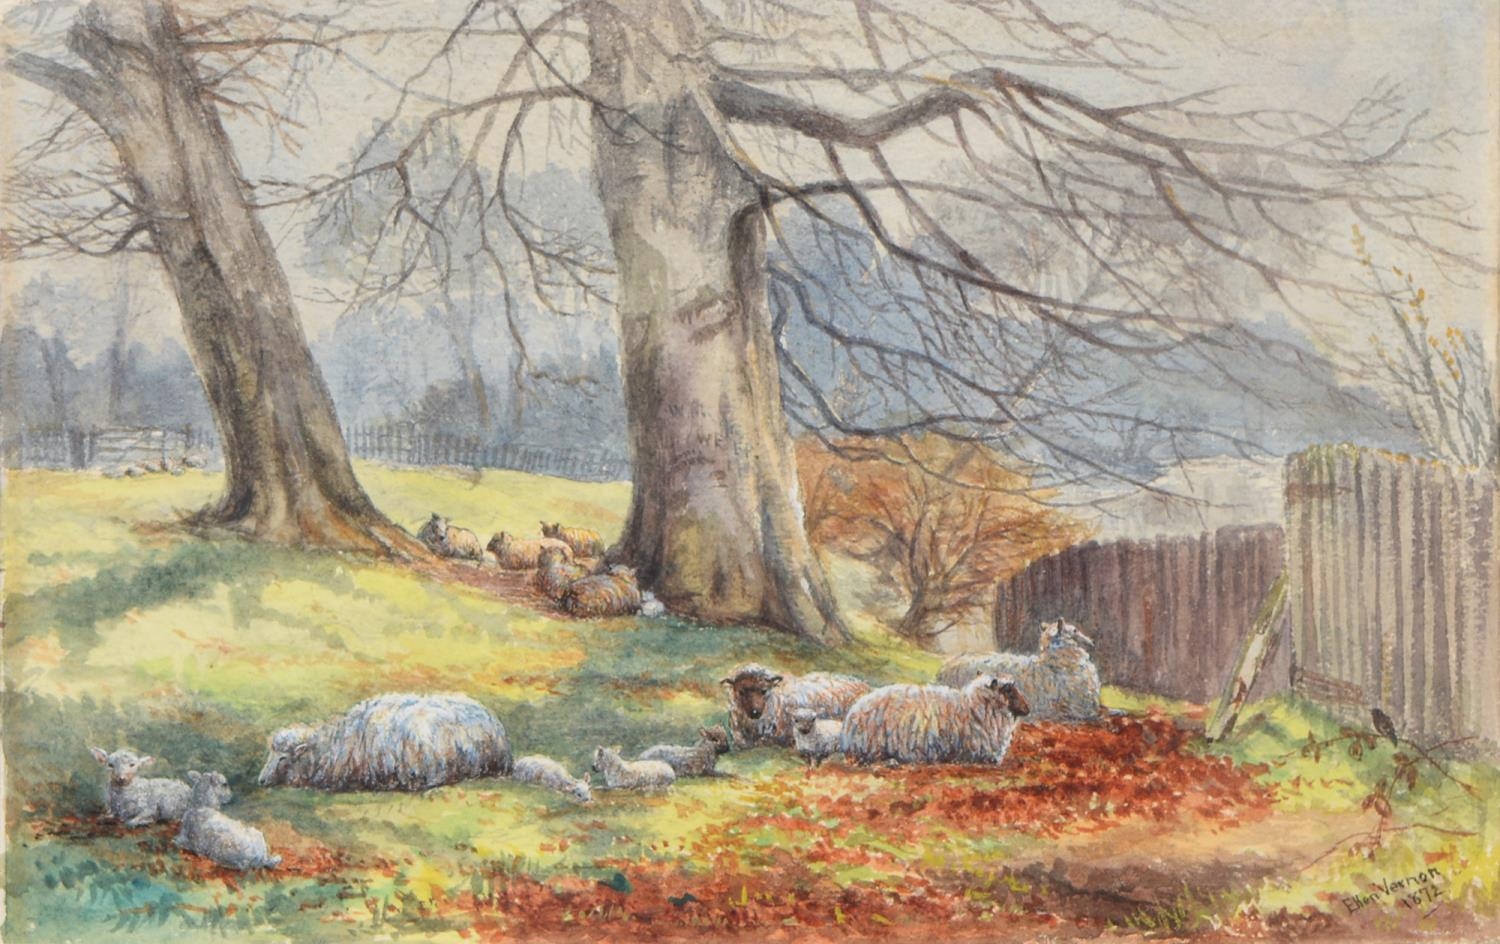 Ellen Vernon, 1872  -  Sheep and Lambs beneath a Tree, signed and dated, watercolour, 15 x 24.5cm - Image 4 of 6